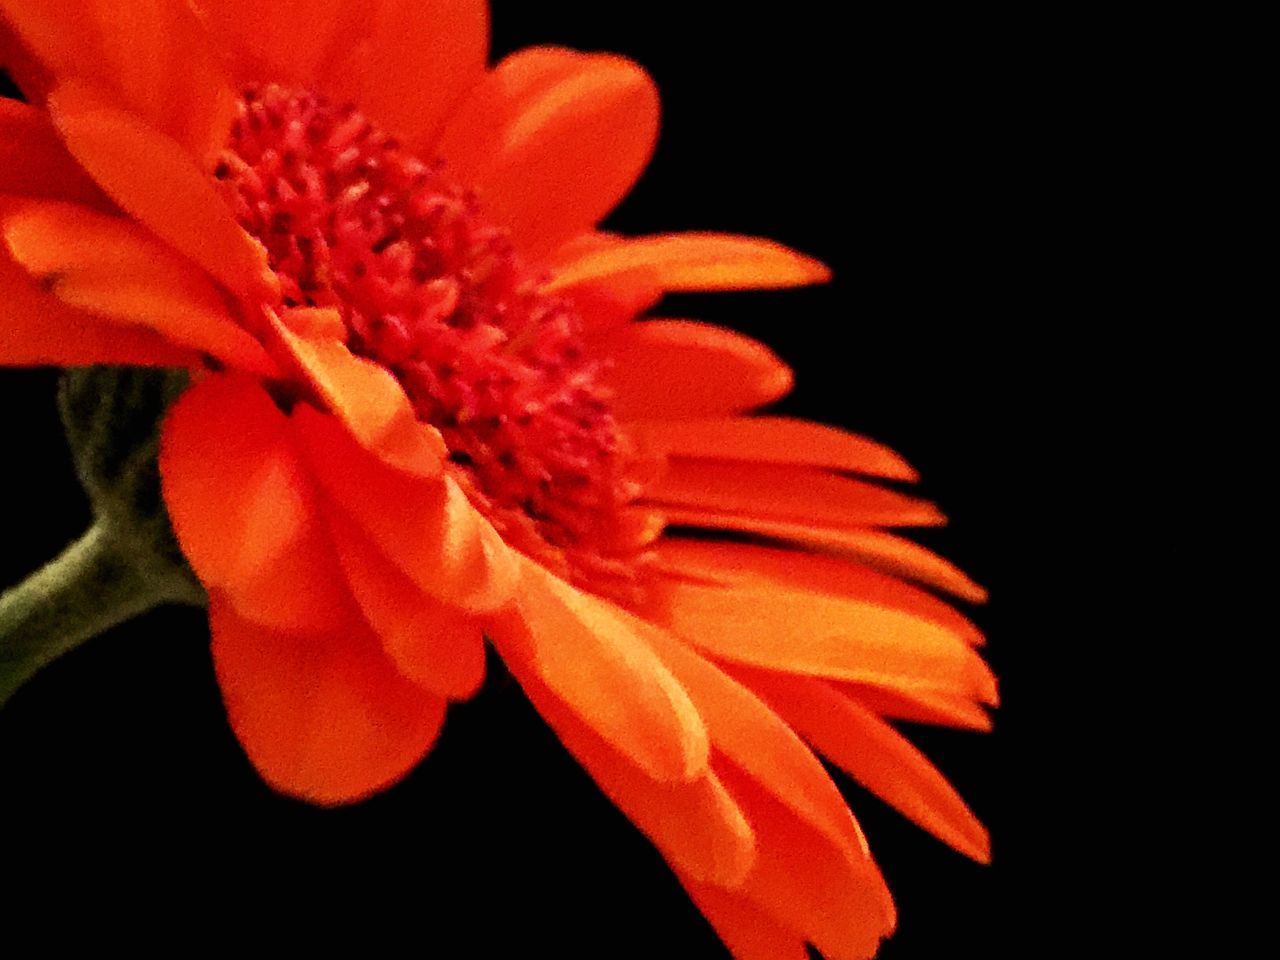 flower, petal, freshness, flower head, fragility, close-up, beauty in nature, growth, single flower, nature, blooming, plant, red, orange color, focus on foreground, pollen, in bloom, black background, stamen, studio shot